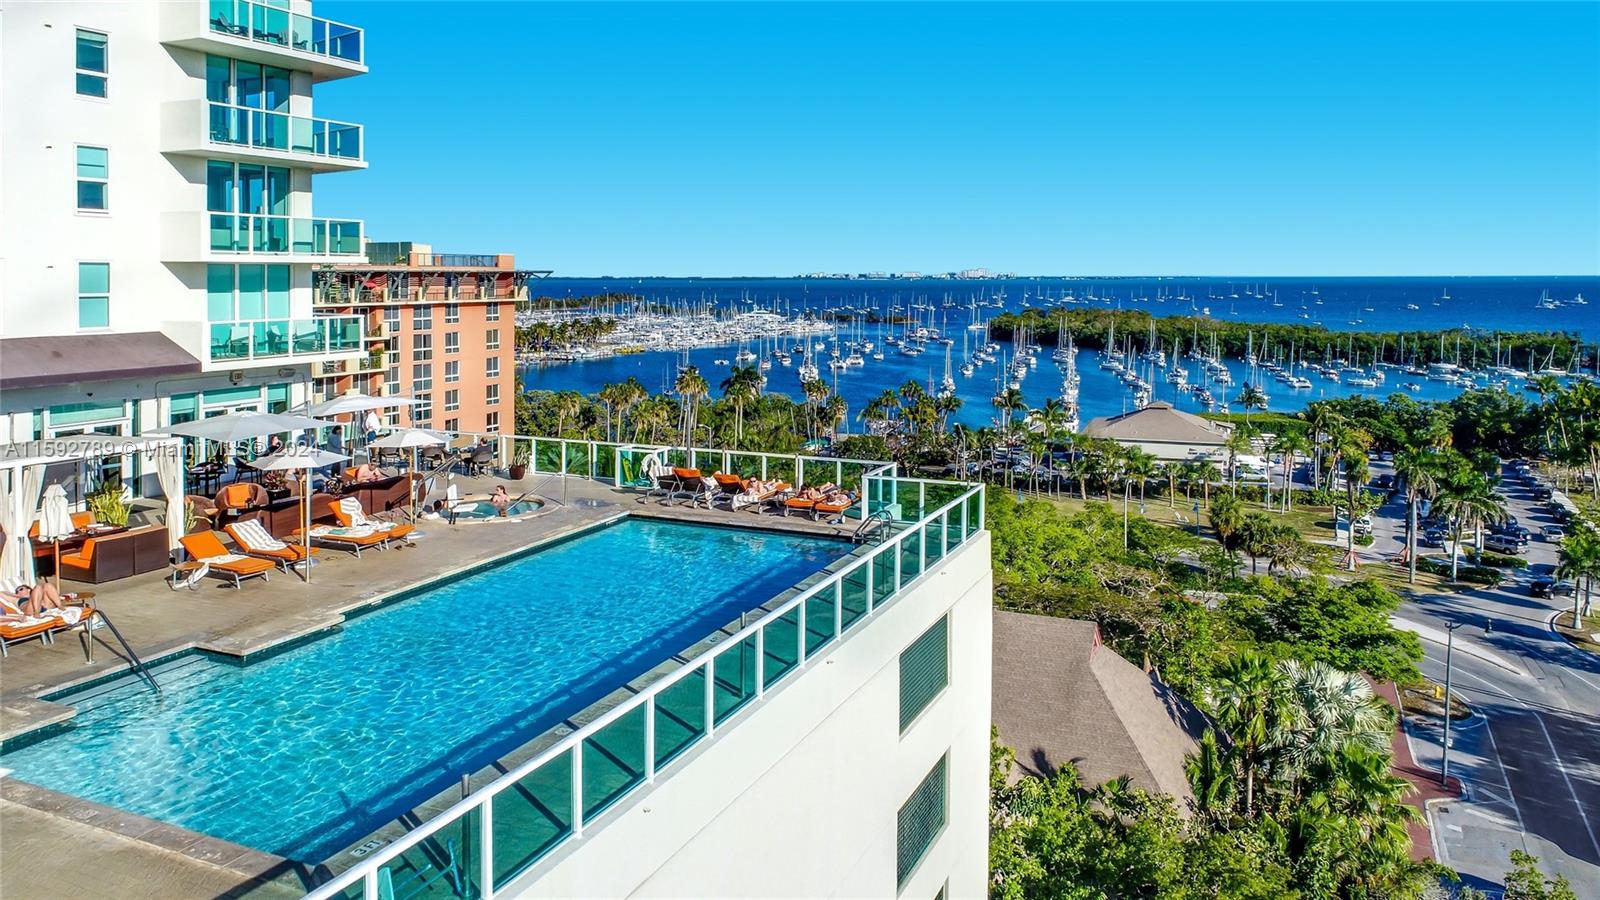 Experience the Grove lifestyle at Arya, a full-service luxury condo/hotel in the heart of the village of Coconut Grove. Walk to galleries, boutiques, cafes and to bayfront parks & marinas. Updated, light-filled interior spaces offer skyline & sunset views + a split-plan layout w/option to live in as a 2BR/2BA +kitchen or rent as 2 separate units (1BR/1BA & 1BR/1BA+kitchen). No rental restrictions. Offered fully furnished w/chic designer pieces for the ultimate in turn-key living. Exceptional building amenities include pool & restaurant overlooking the bay, fitness center w/sauna, squash courts, business center & 24 hr. attended lobby w/concierge. Secure garage parking (1 unassigned space) as well as valet & street parking. Minutes to downtown, MIA, Key Biscayne & the Beaches.